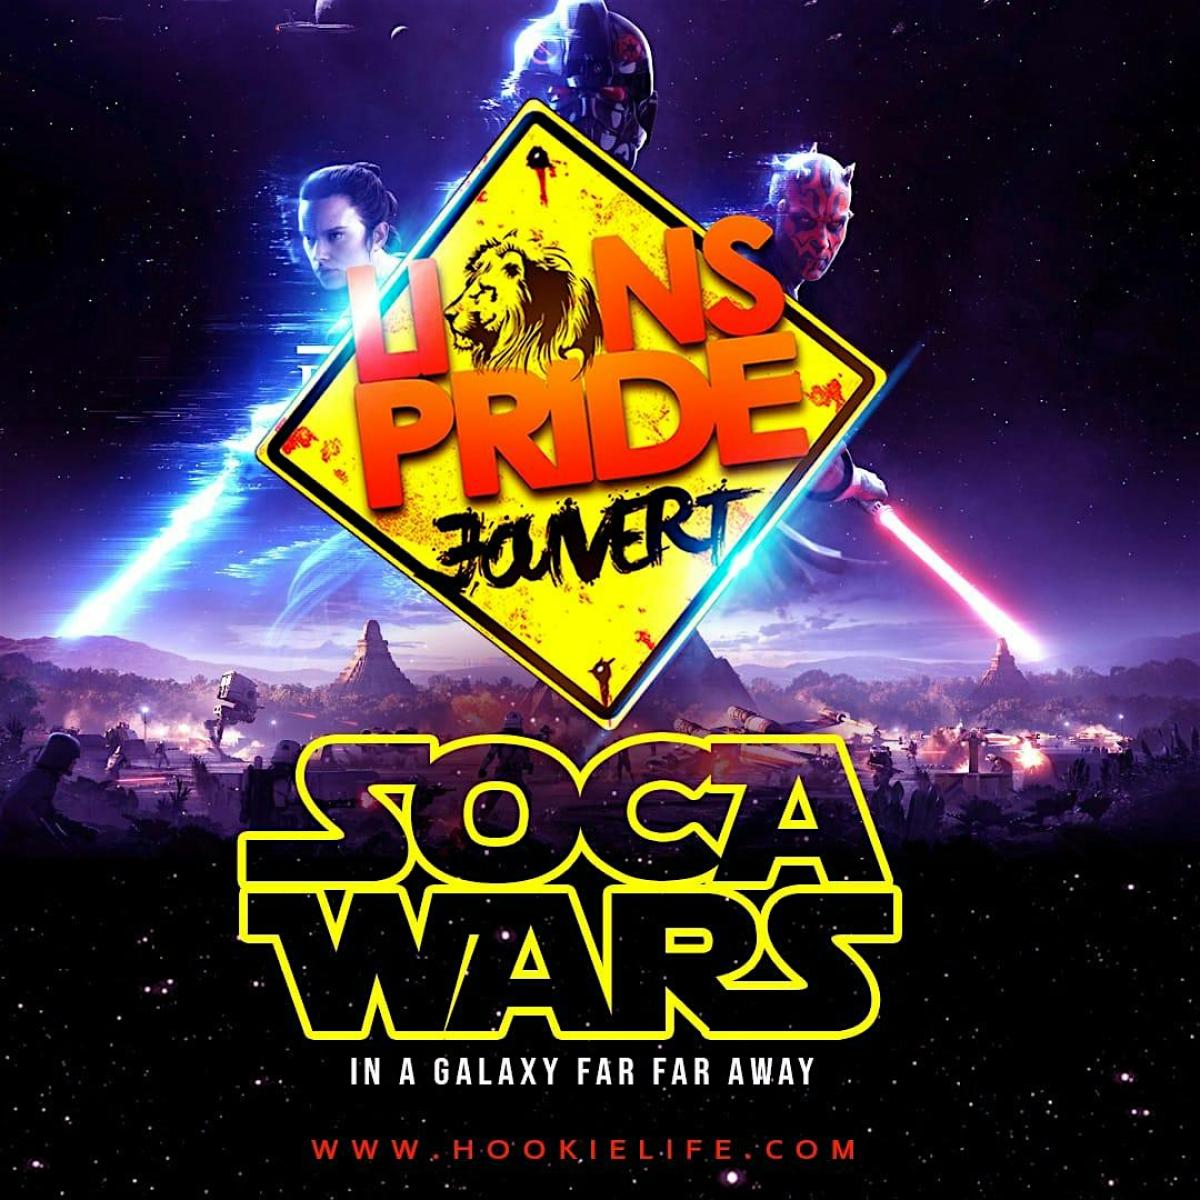 Lions Pride J'ouvert: Soca Wars flyer or graphic.